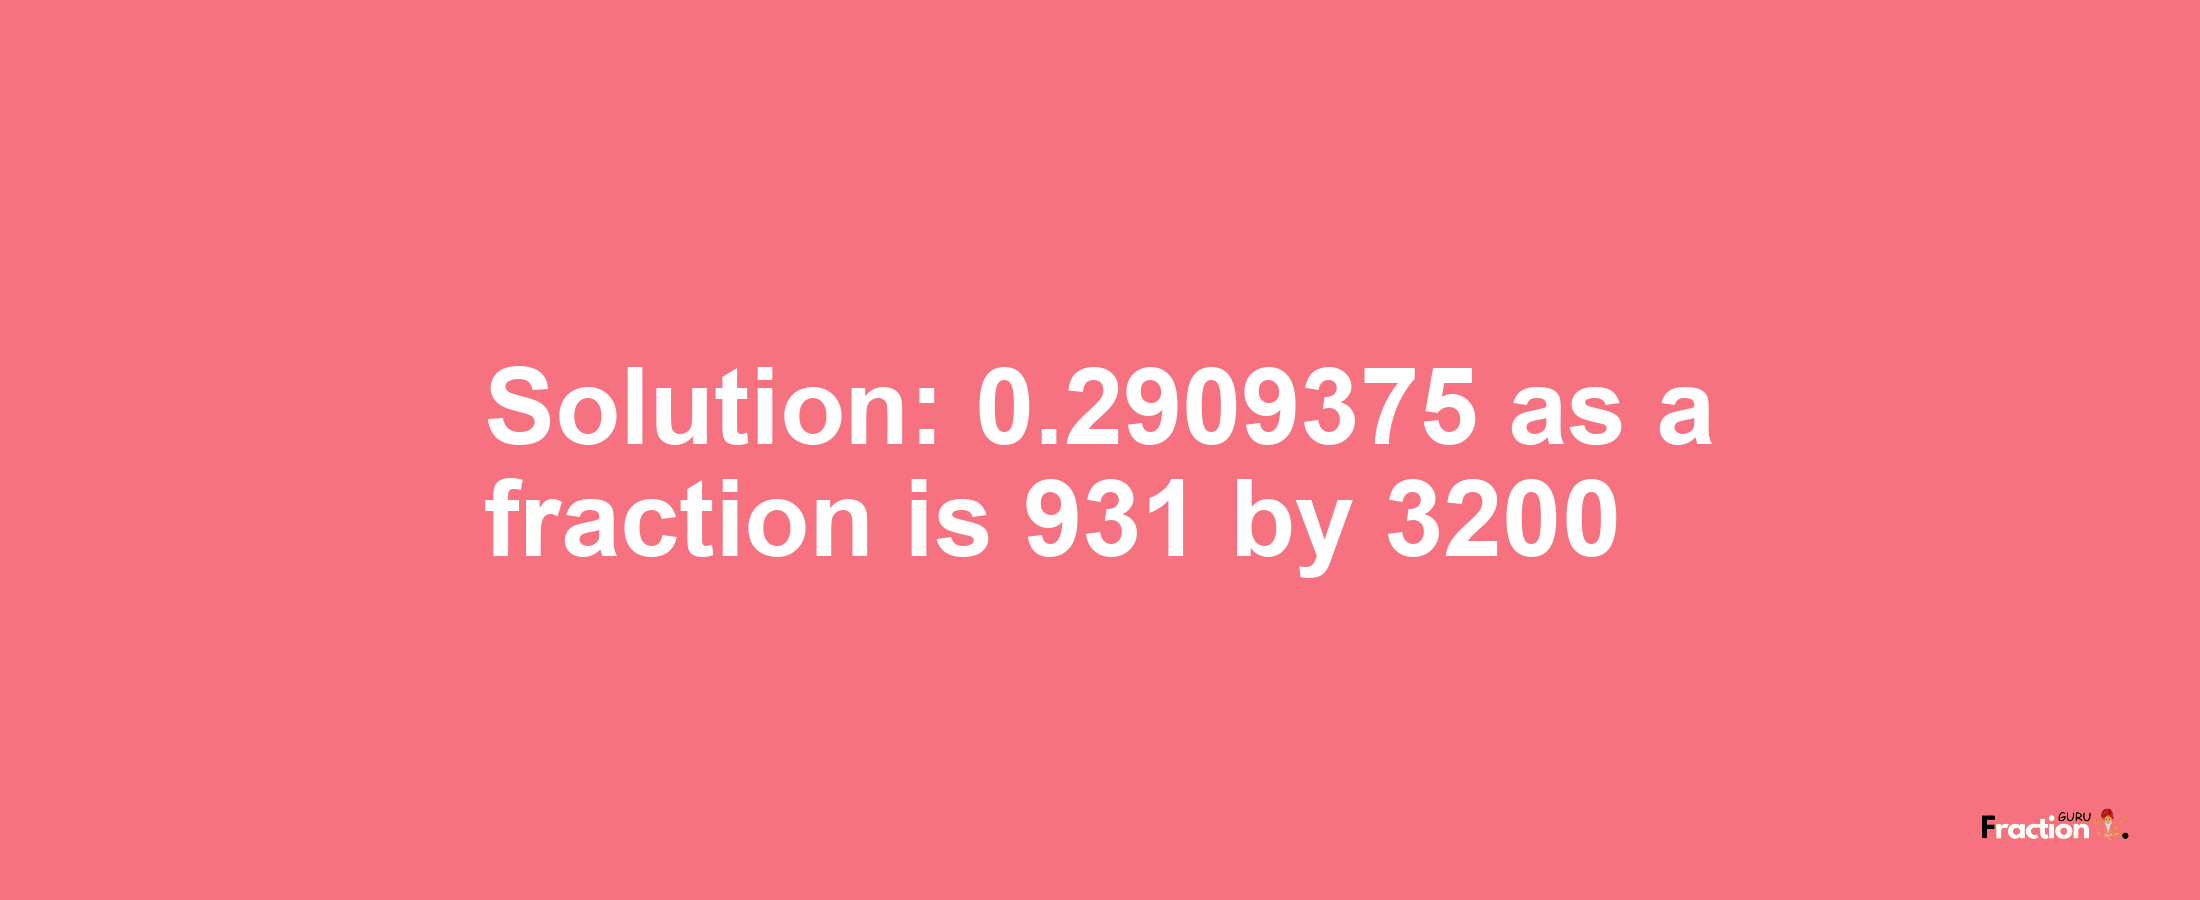 Solution:0.2909375 as a fraction is 931/3200